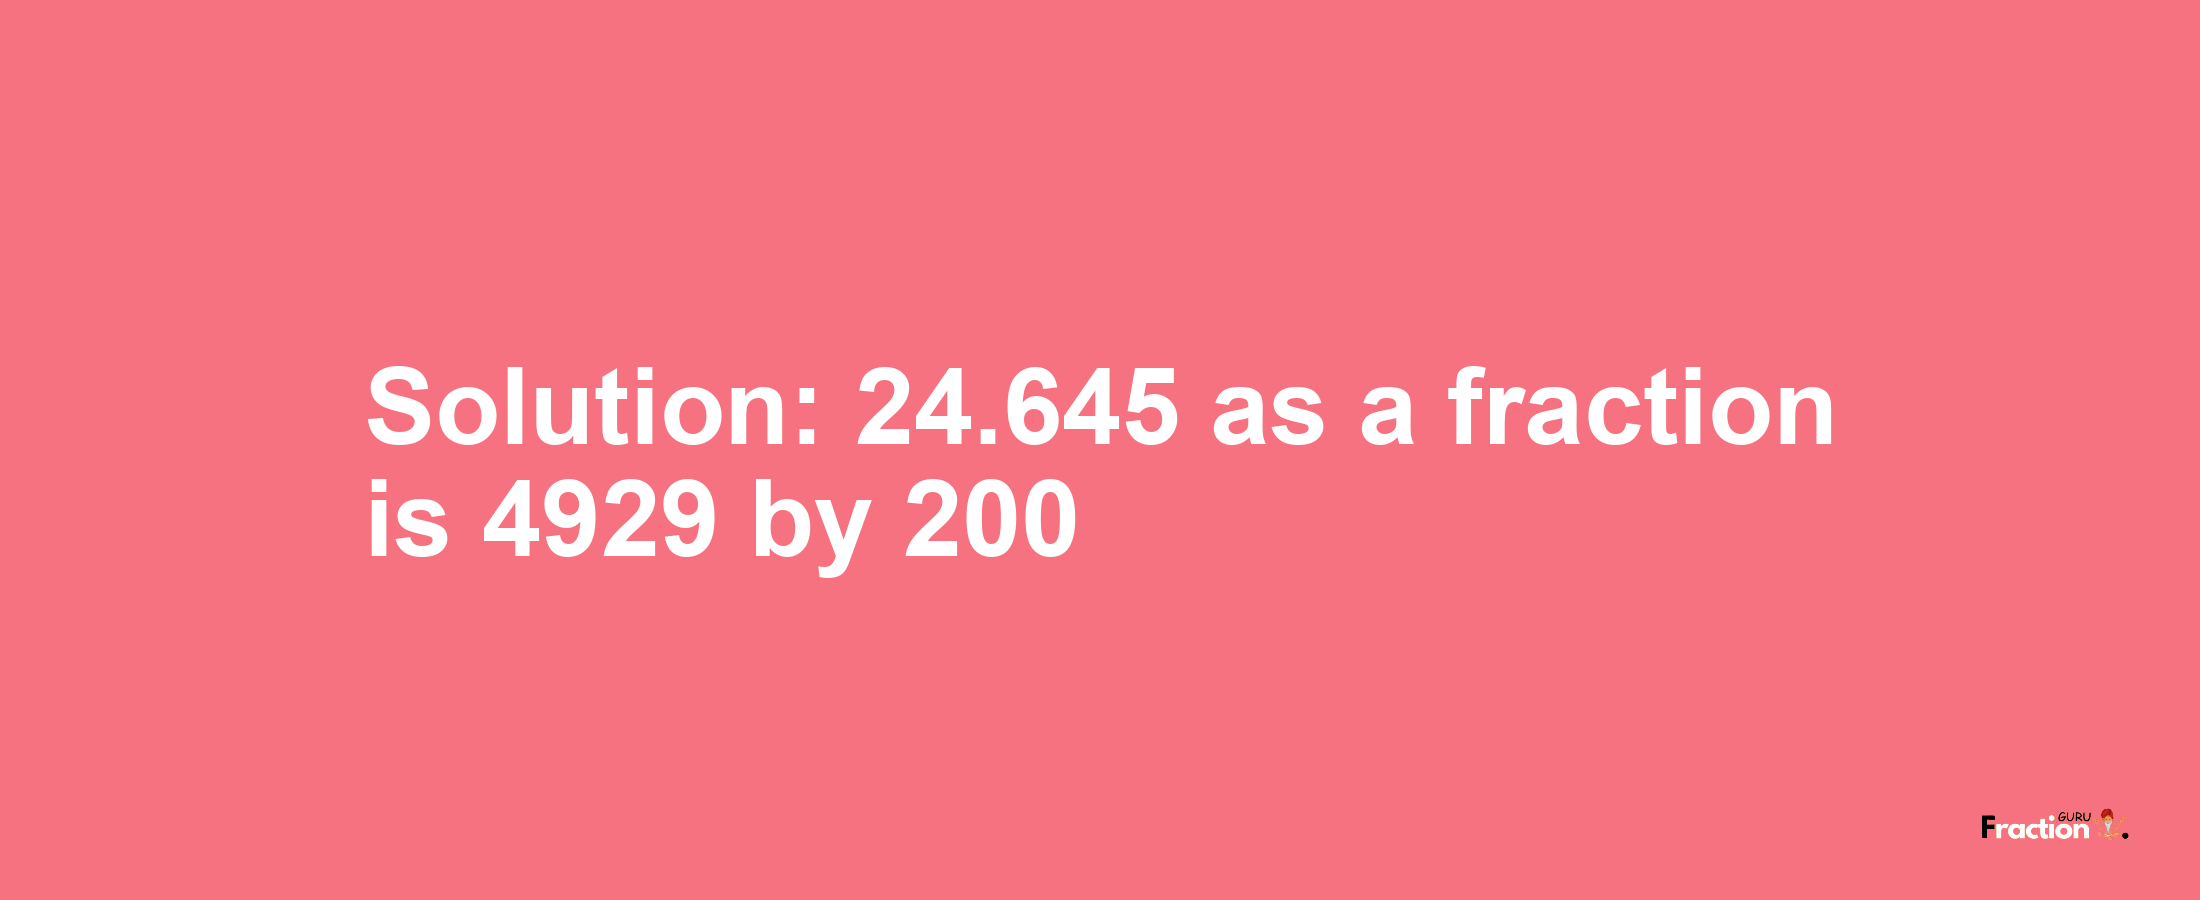 Solution:24.645 as a fraction is 4929/200